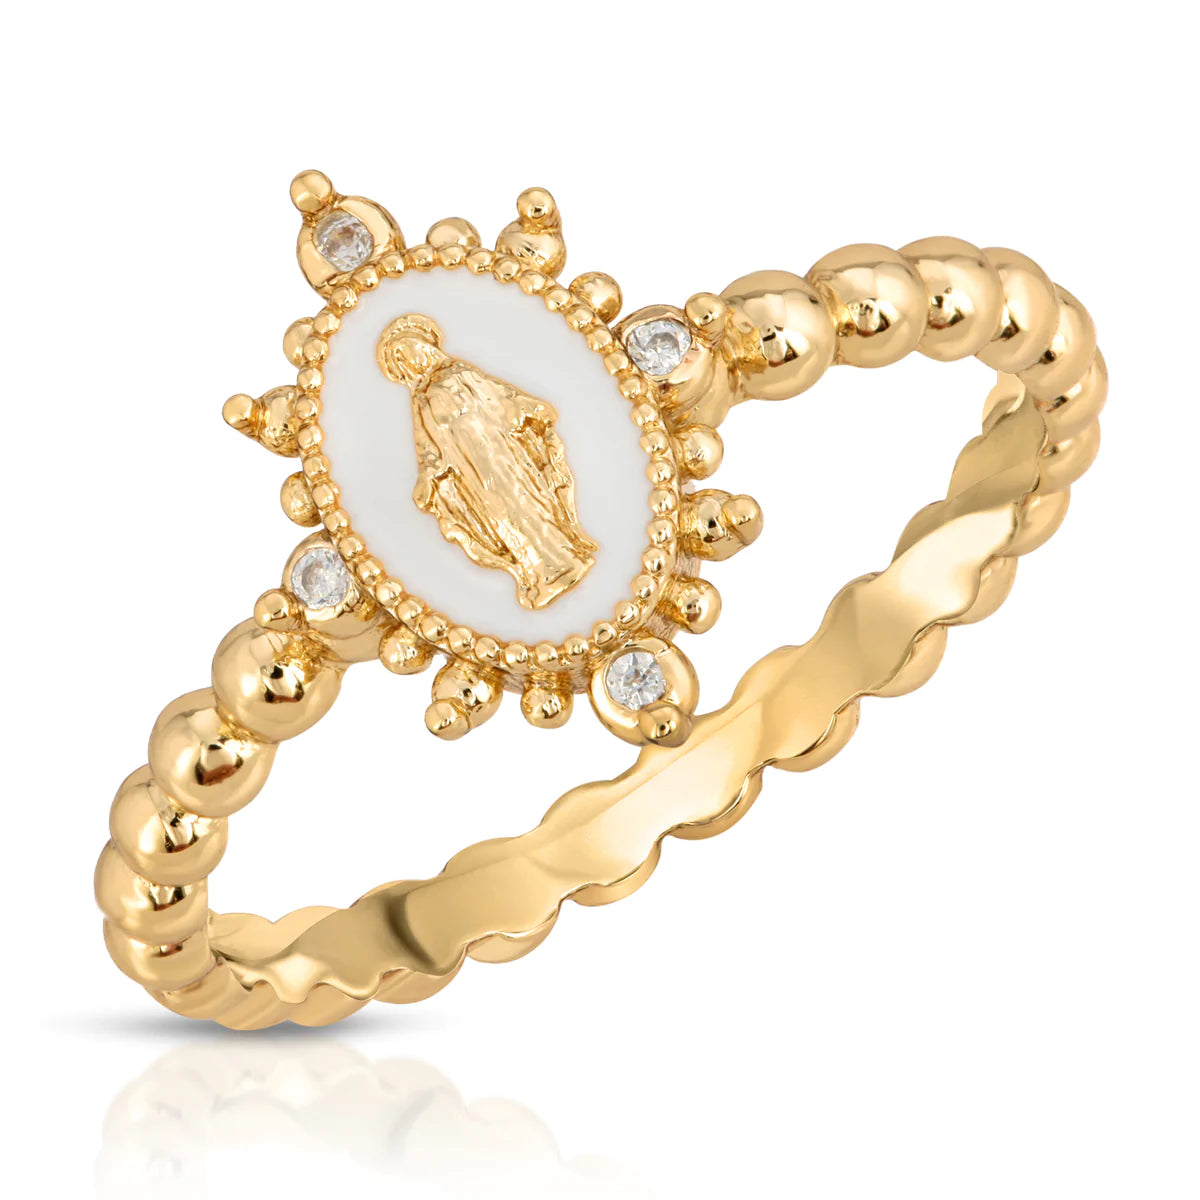 Lady Lourdes Ring in White